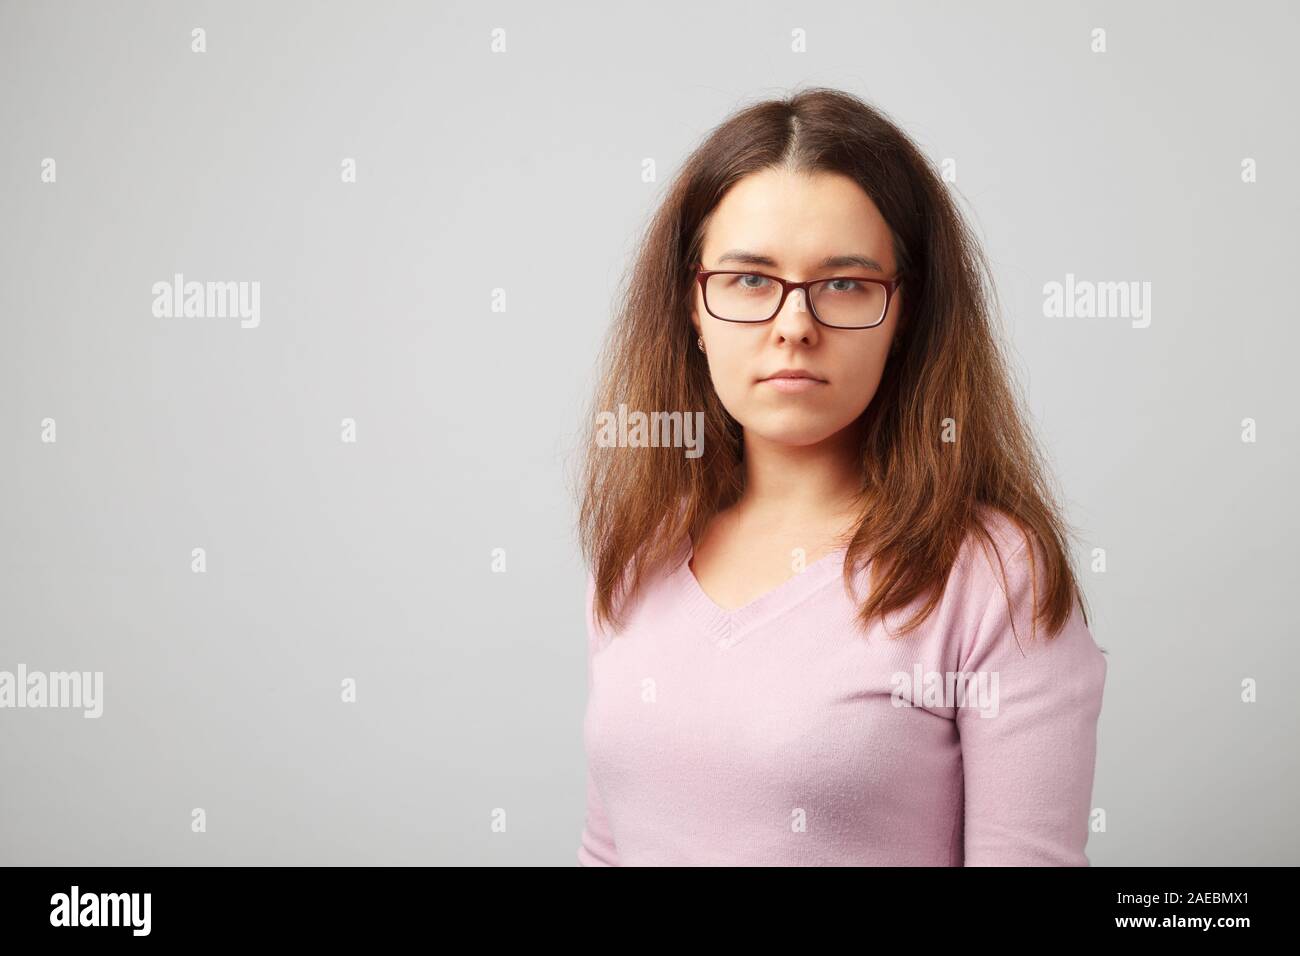 Head and shoulder portrait of brunette young woman with glasses. Stock Photo